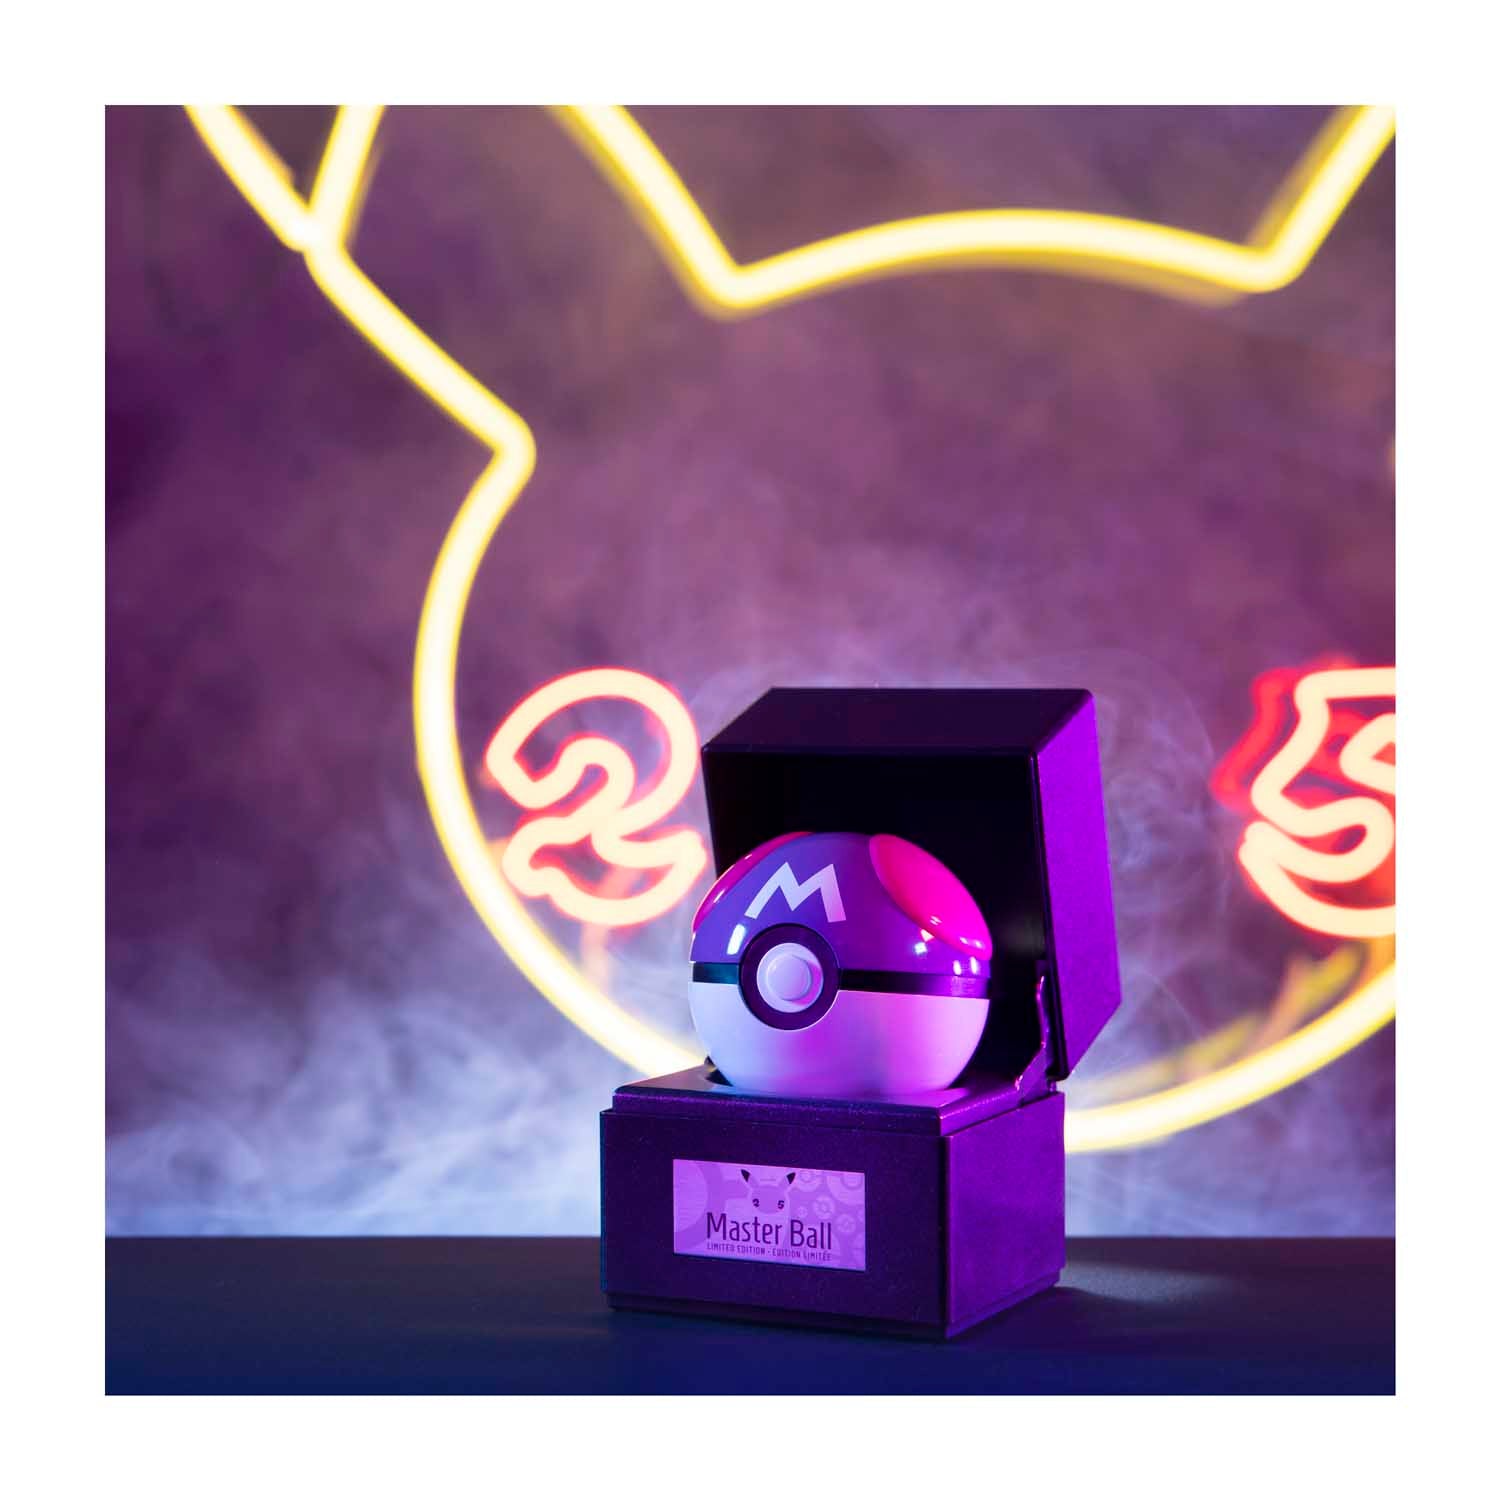 Master Ball by The Wand Company (LE 5000) – Product Sage Collectibles